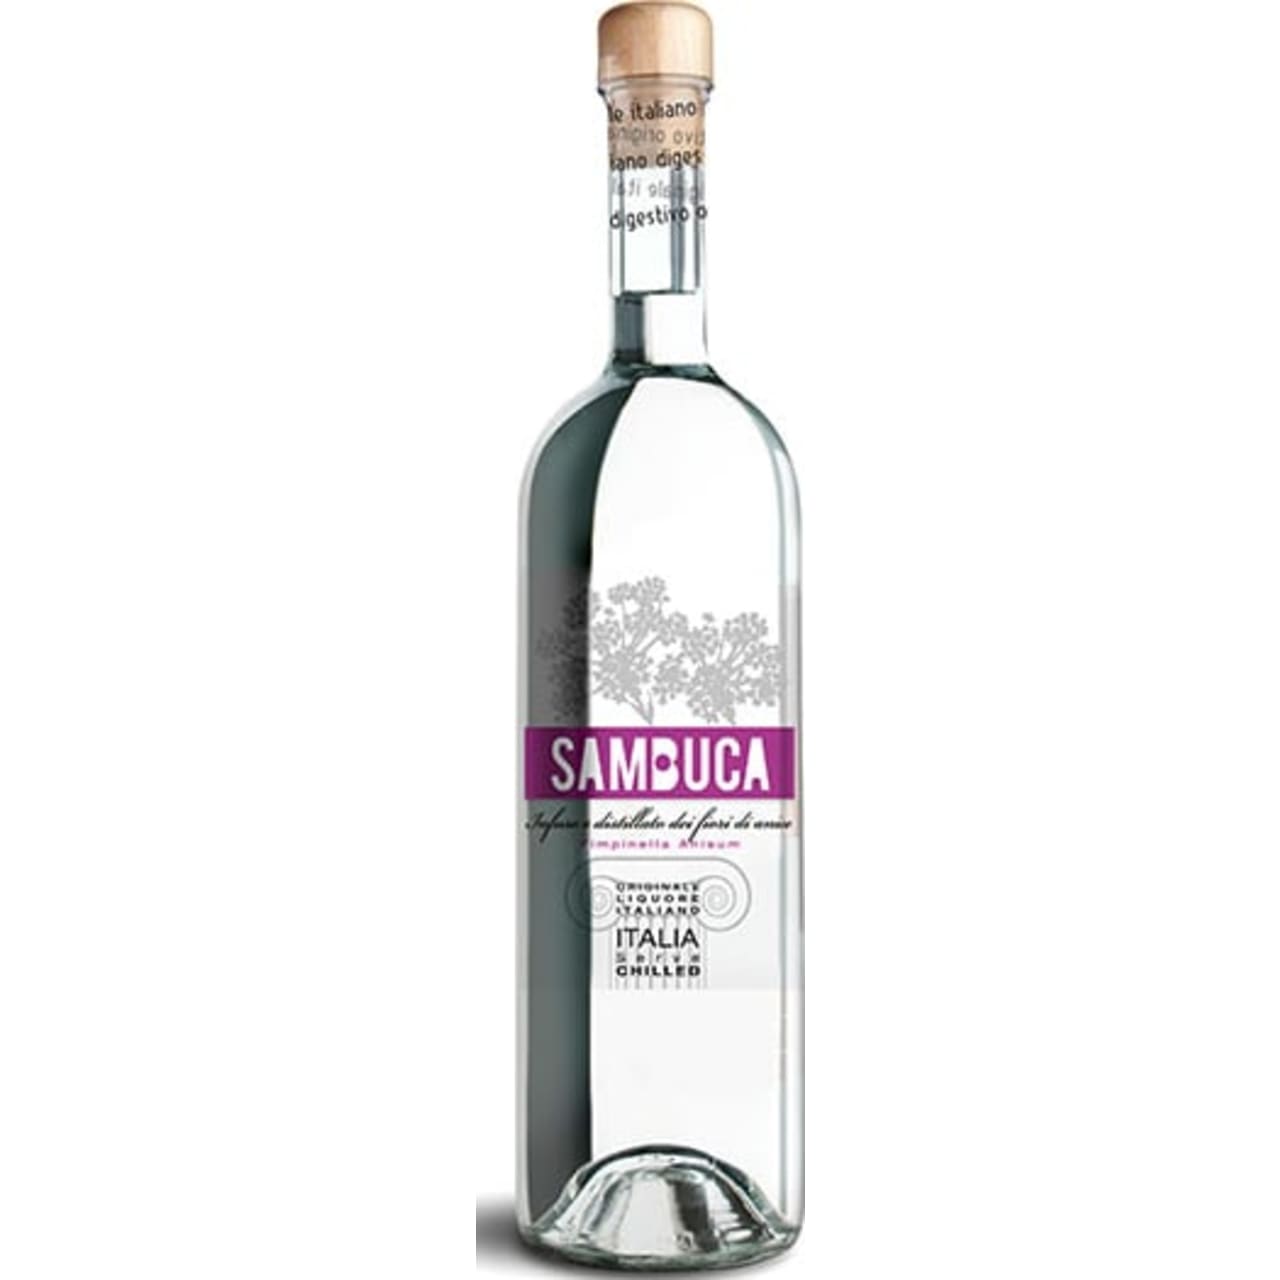 Bepi Tosolini Sambuca is a classic Italian anise-based liqueur made using only natural ingredients from this iconic producer